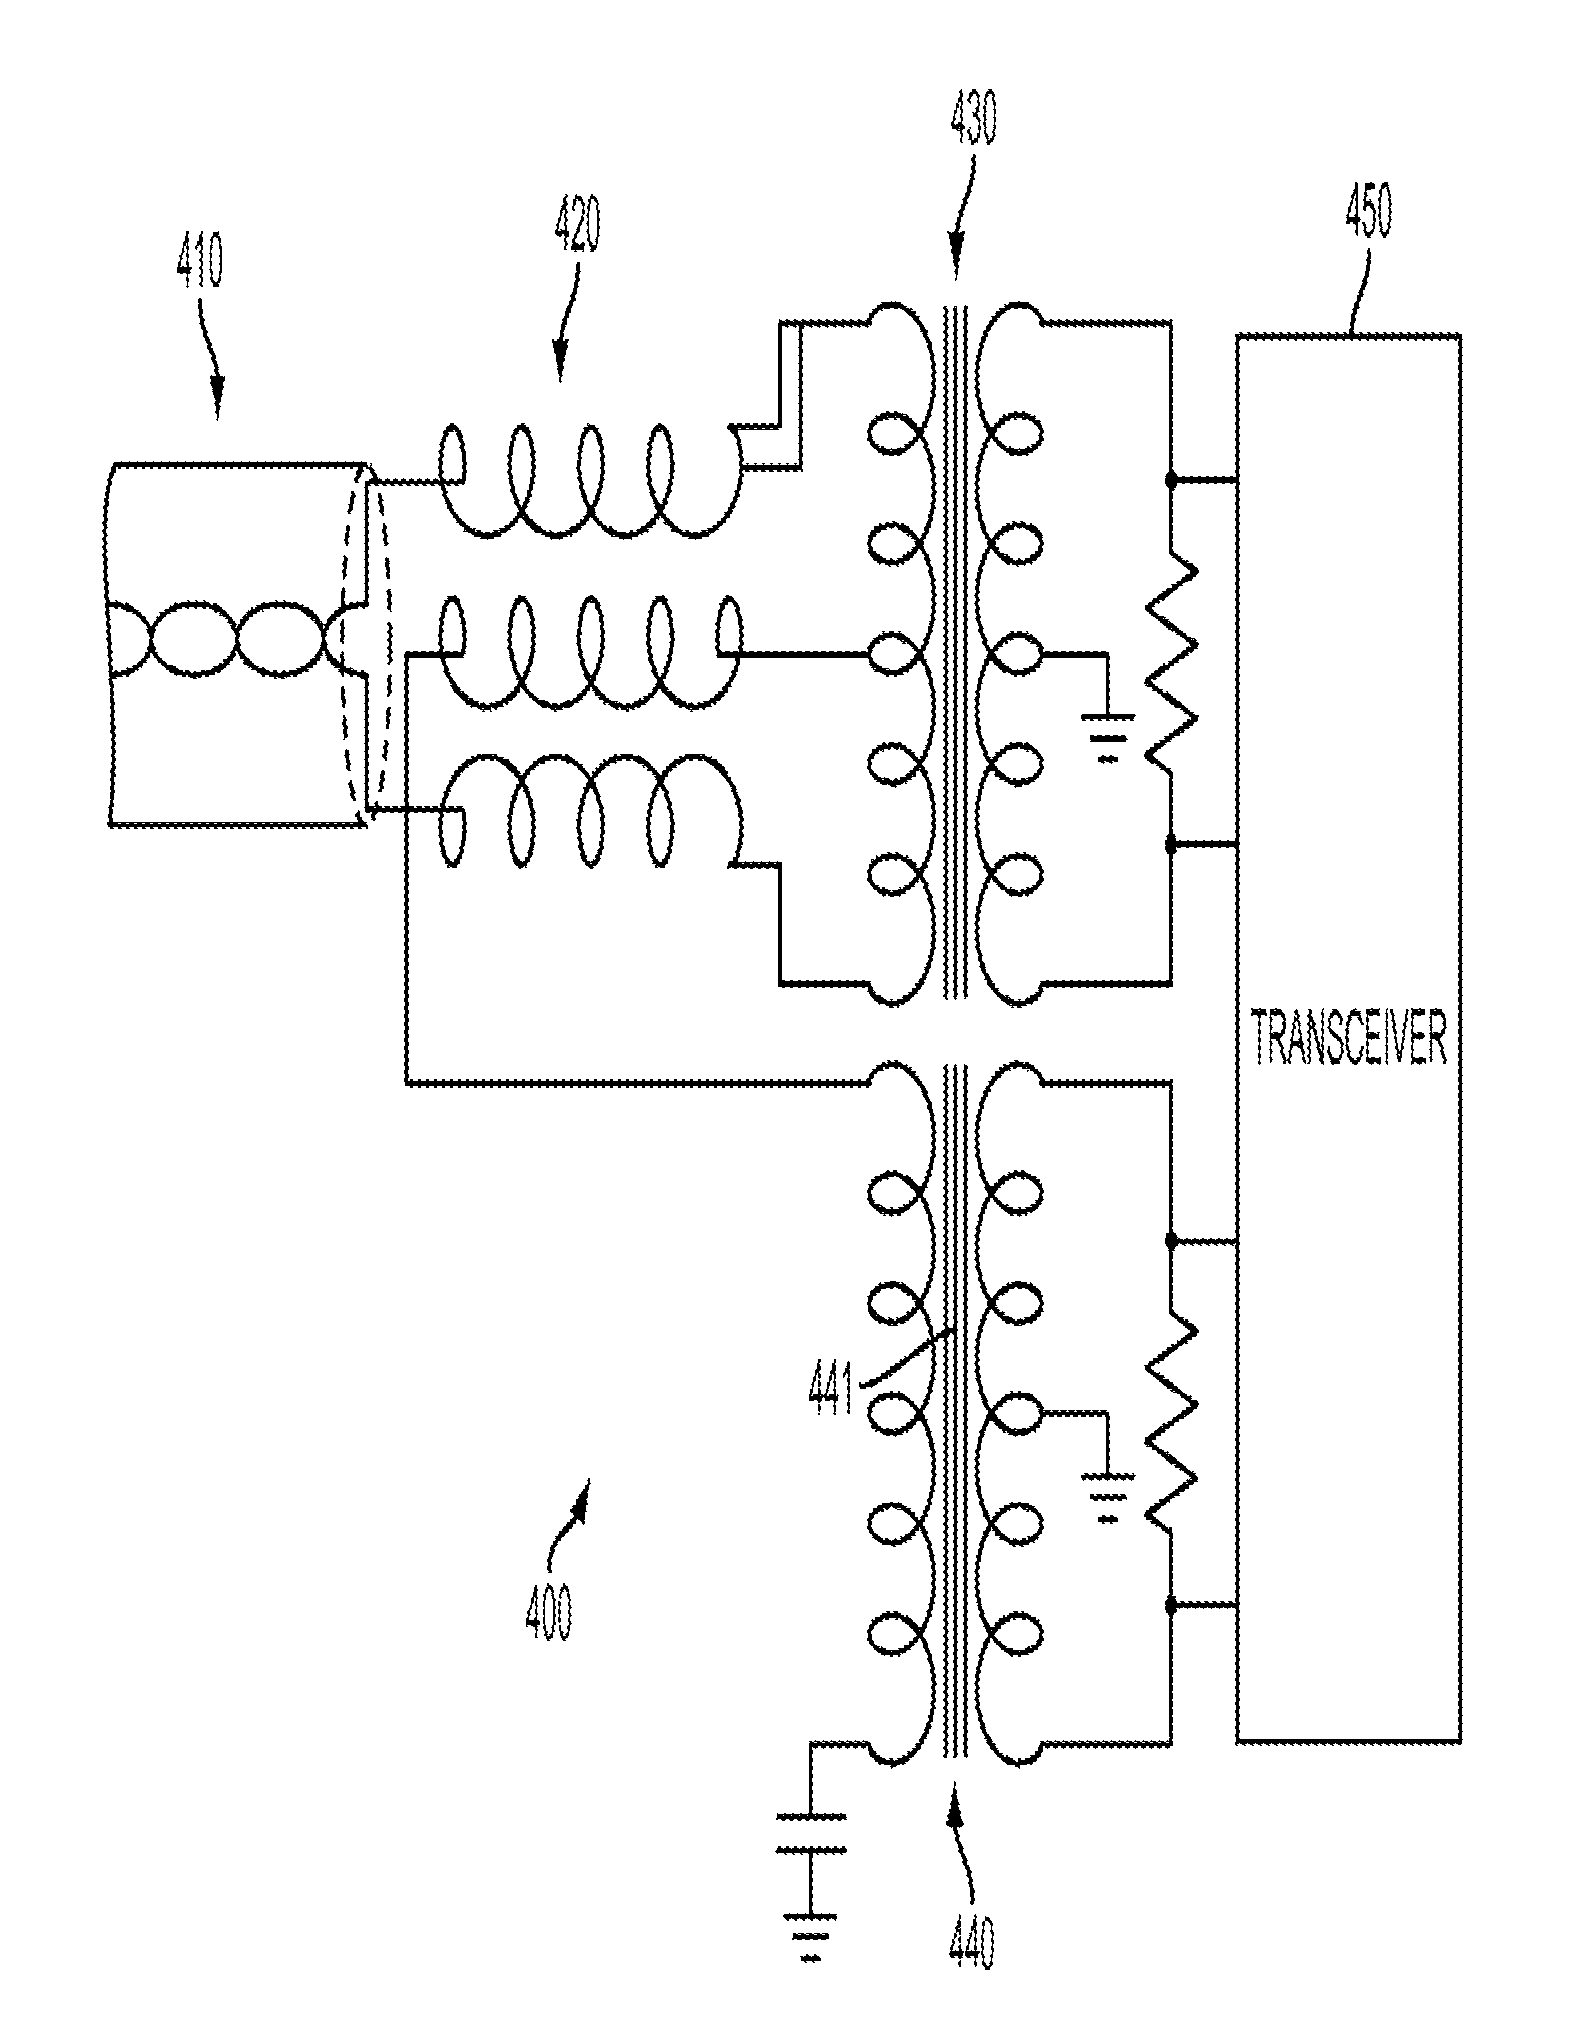 Magnetic package for a communication system